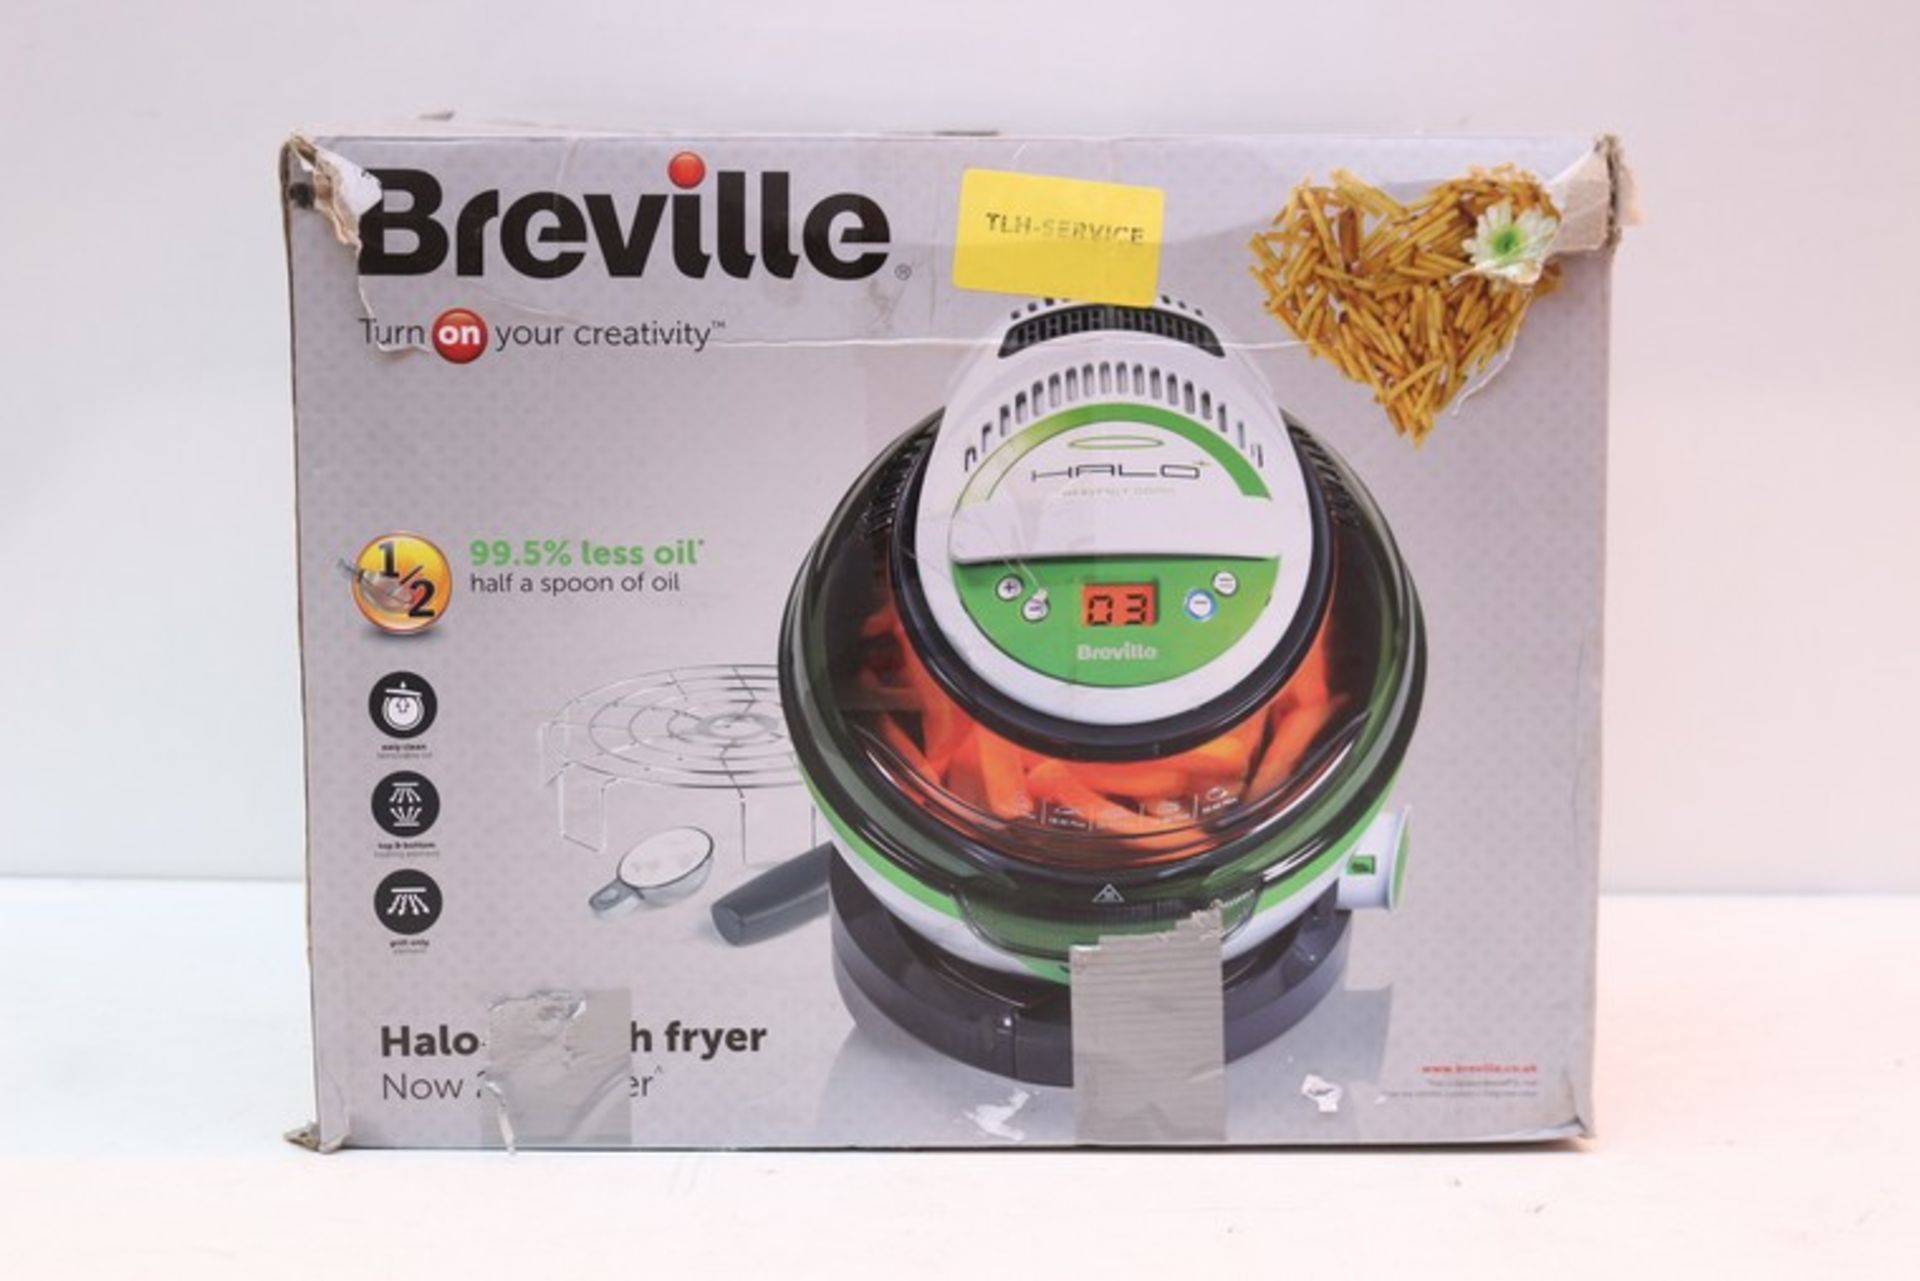 1 x BOXED BREVILLE HALO HALOGEN OVEN RRP £180 *PLEASE NOTE THAT THE BID PRICE IS MULTIPLIED BY THE